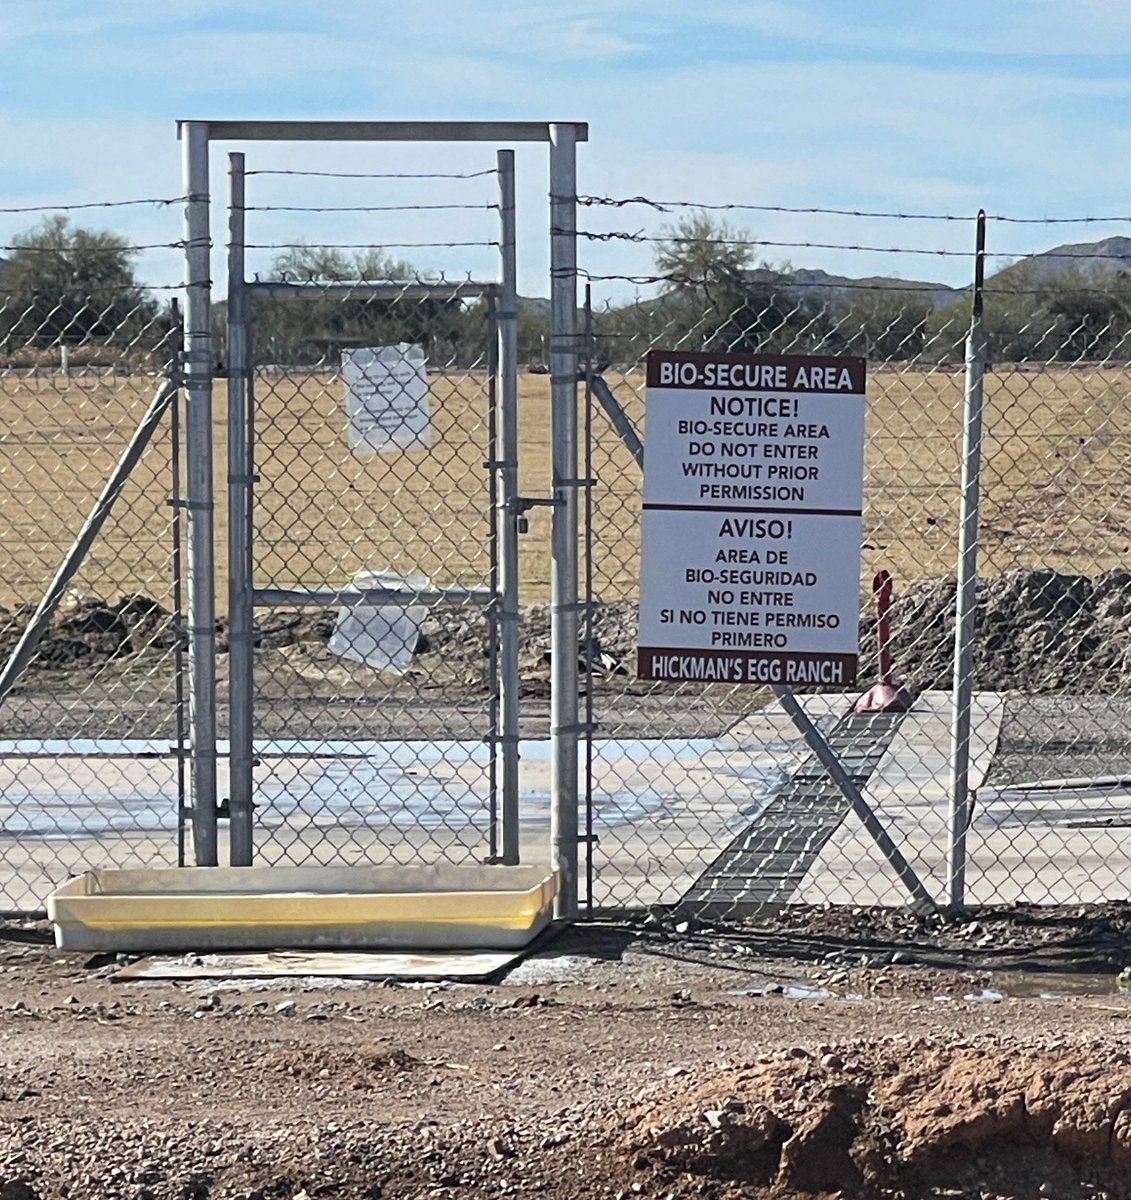 Bio-Secure Area? ☣️
Barbed wire?

For chickens? 🐓

Hickman's Egg Ranch,
Tonopah, AZ

Yesterday.

🐓☣️
#WeAreJohnCullen #WeWontStop